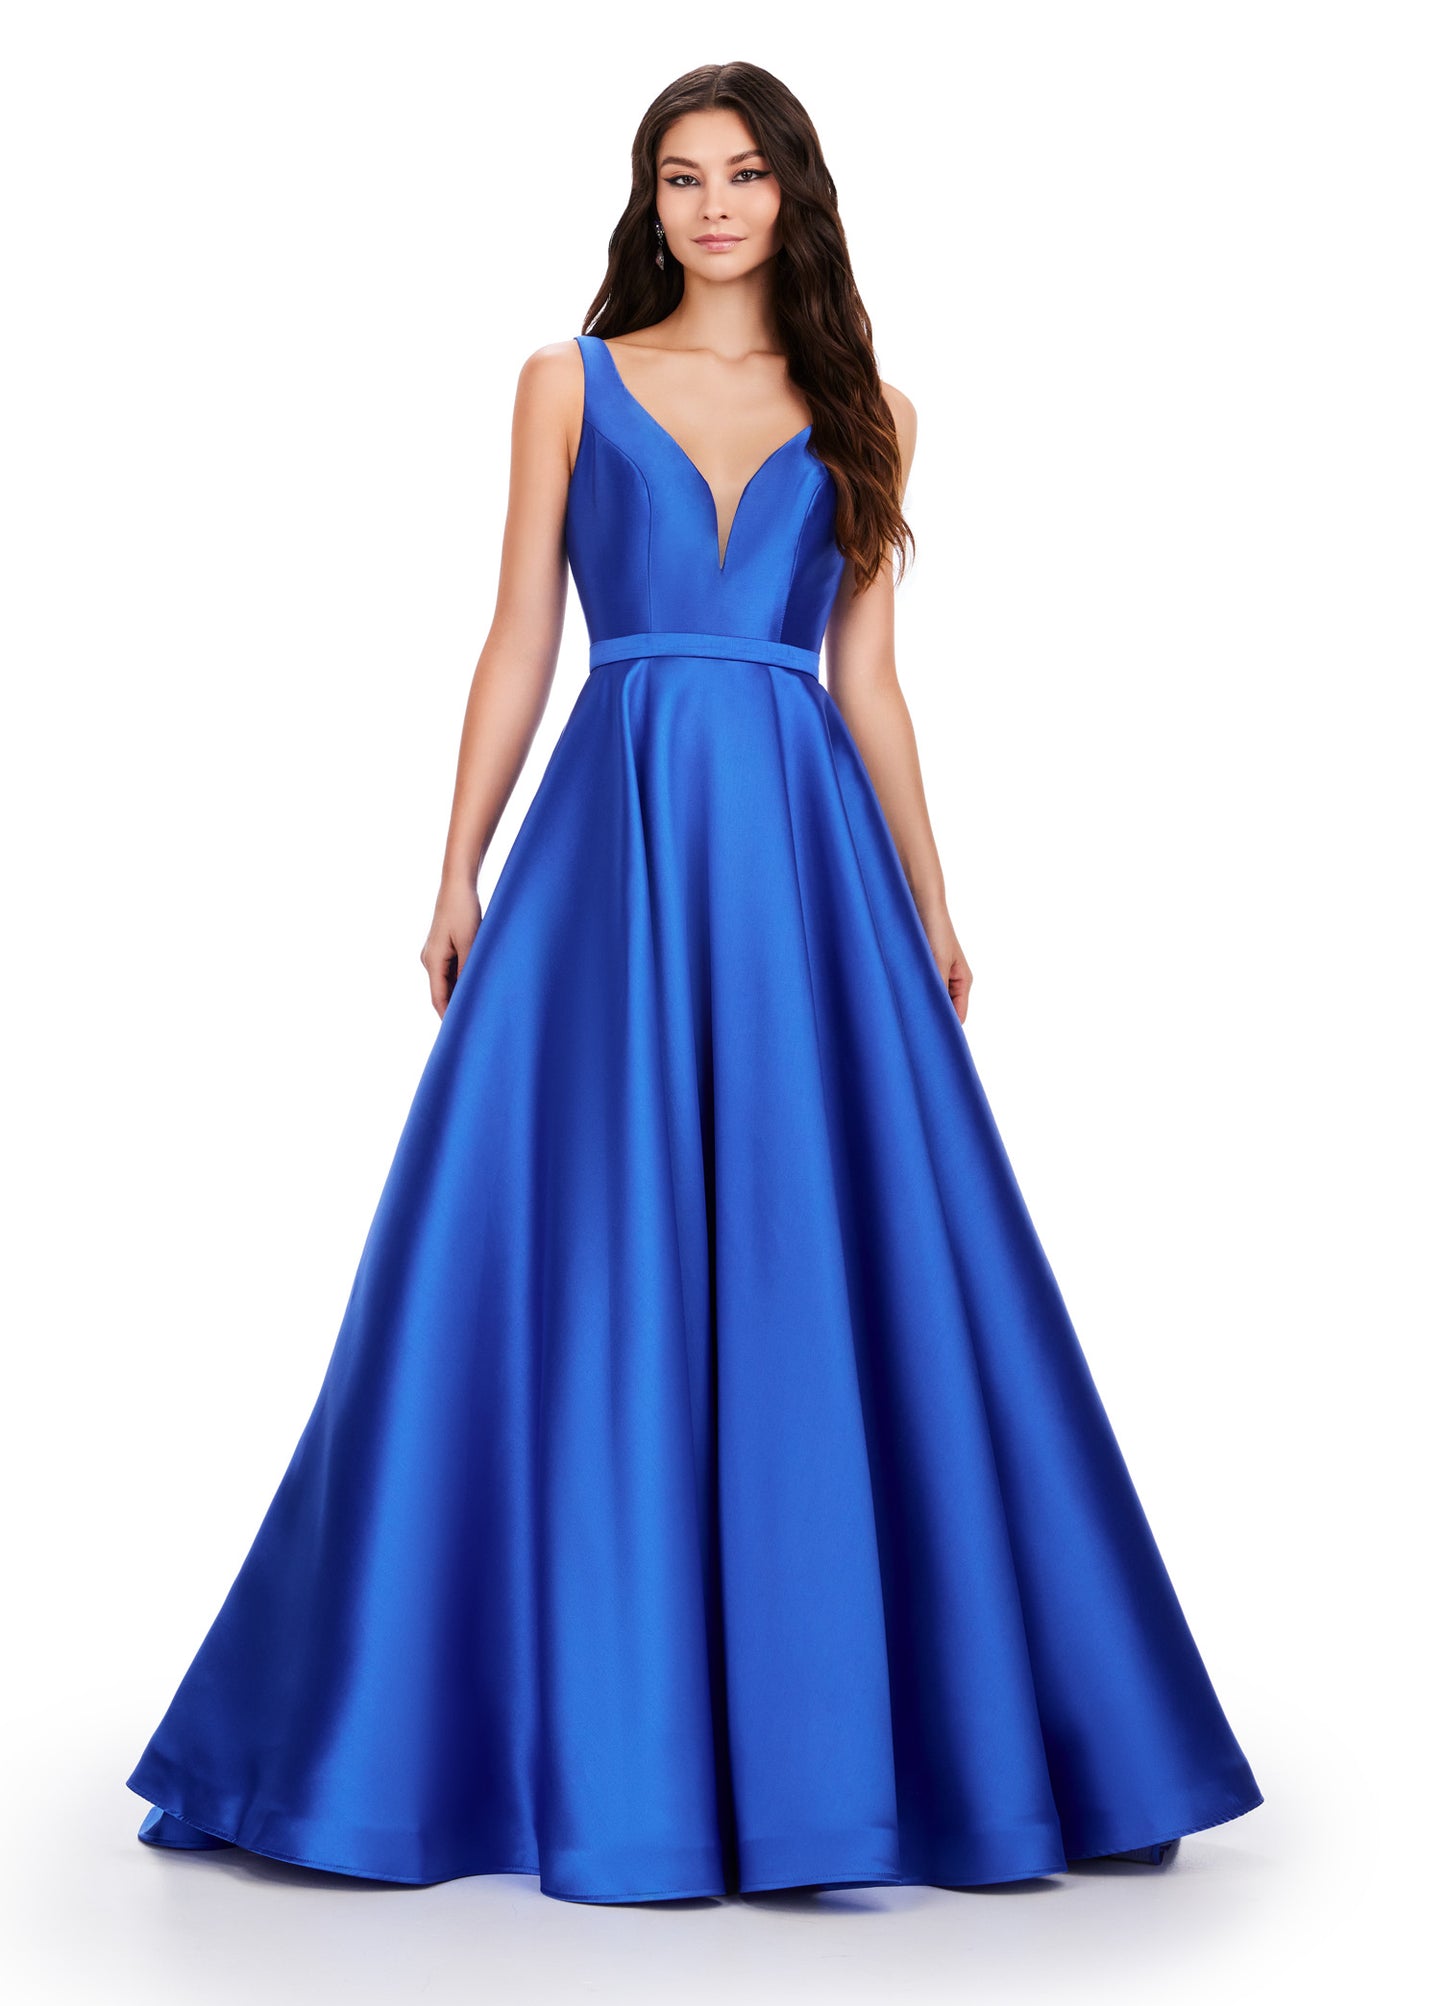 Elevate any event with the Ashley Lauren 11541 Long Prom Dress. The V-neck Mikado gown features a sweeping train for a formal and pageant-ready look. Turn heads with this elegant and expertly crafted gown. A classic! This v neck Mikado ball gown features a gorgeous sweep train and a waist detail.